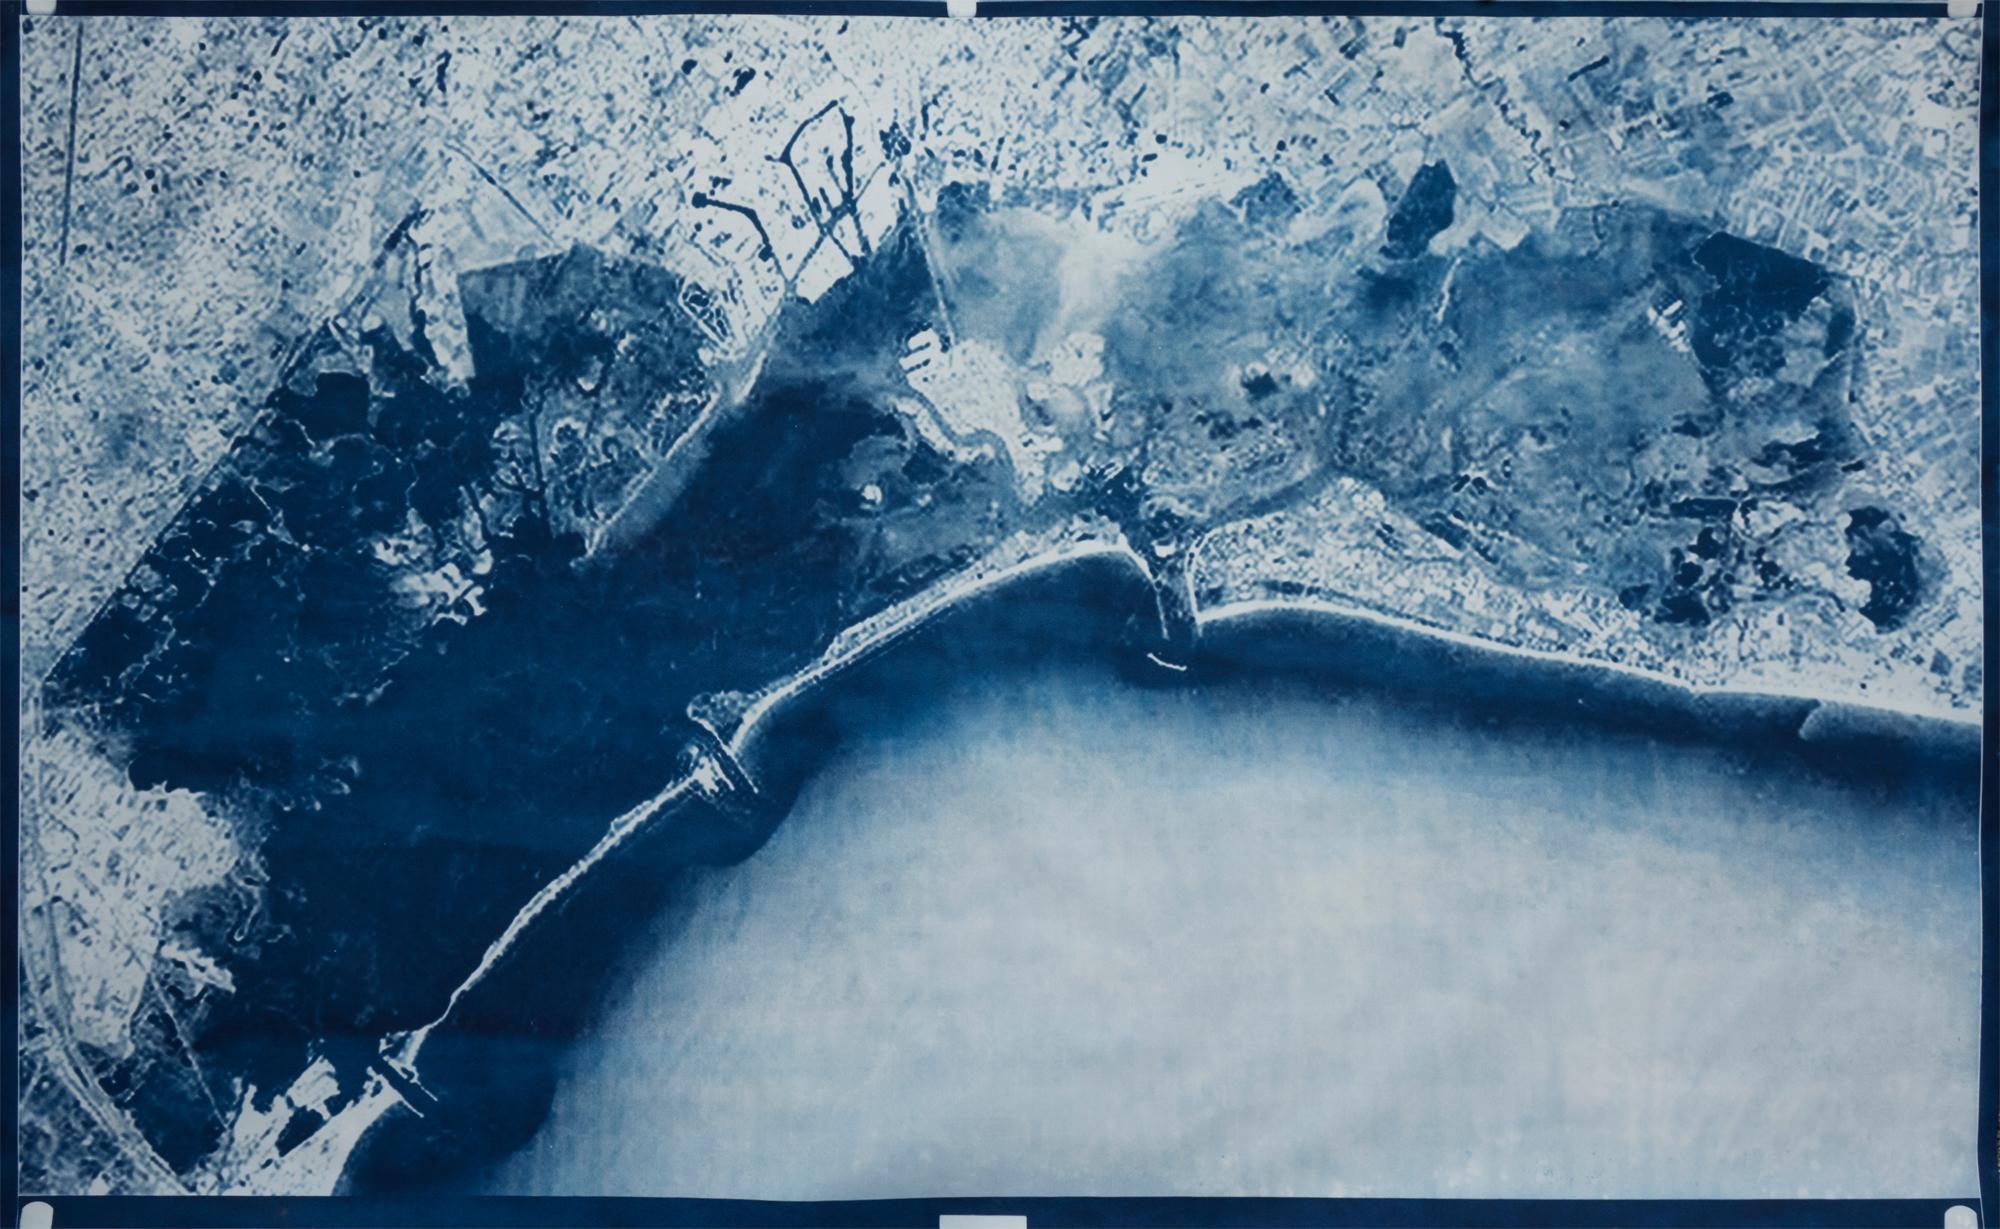 Blueprint on 50% Fabriano cotton paper of elaborated satellite photo of the Venice Lagoon